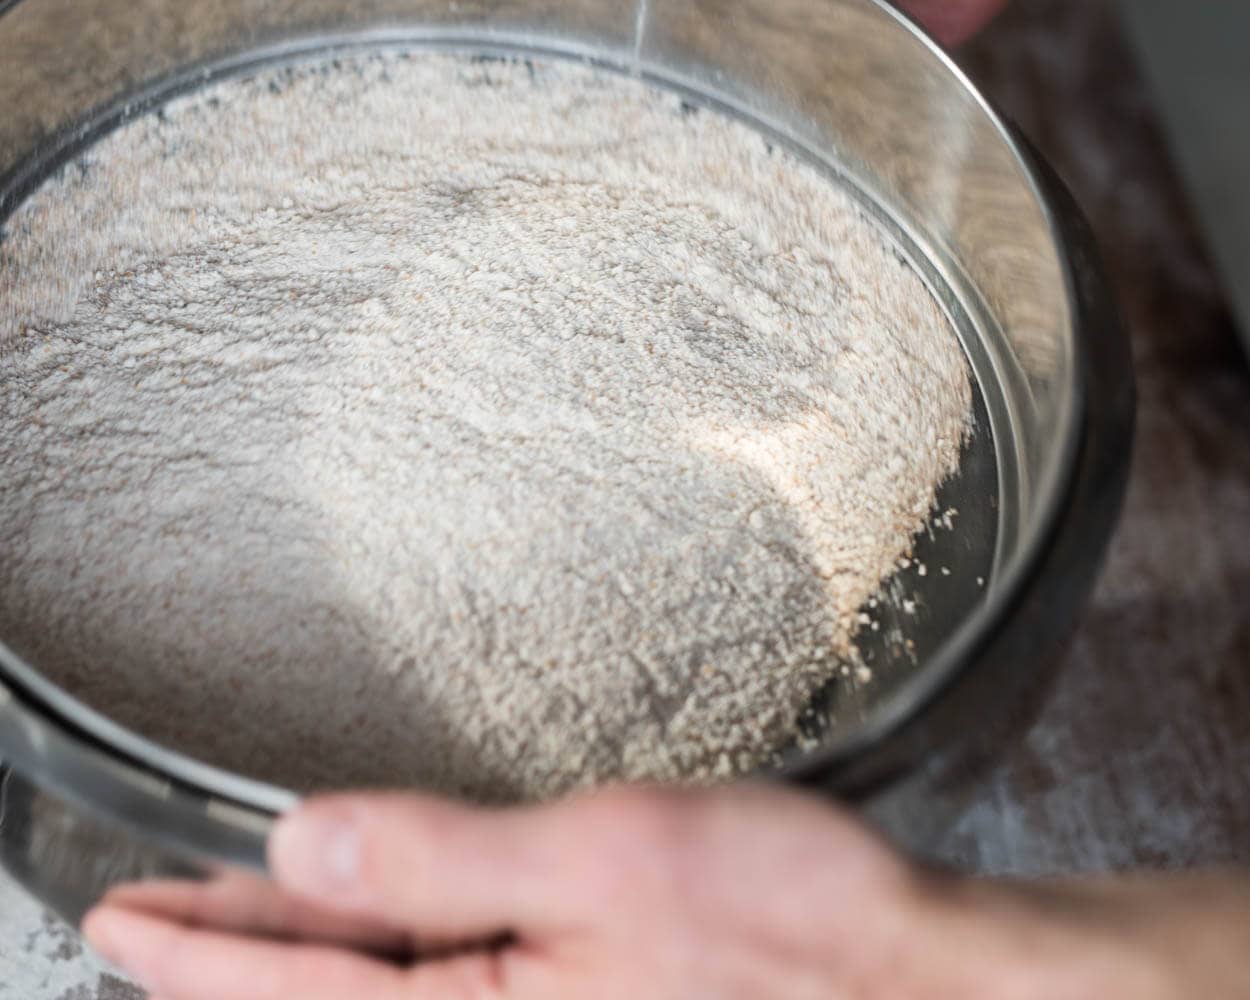 Sifting out bran from whole wheat flour